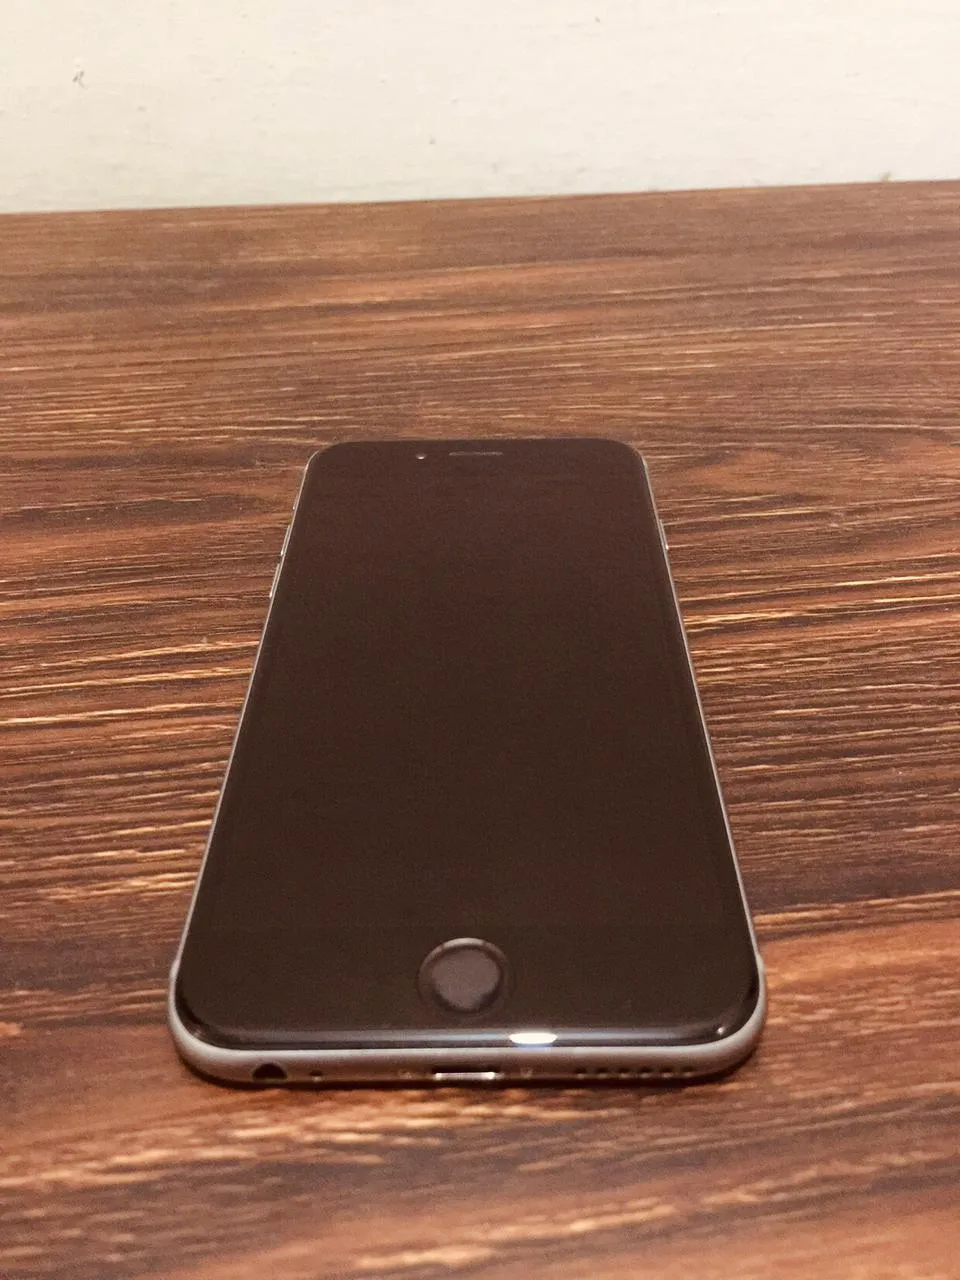 iPhone 6s 16gb up for sell ASAP - photo 2